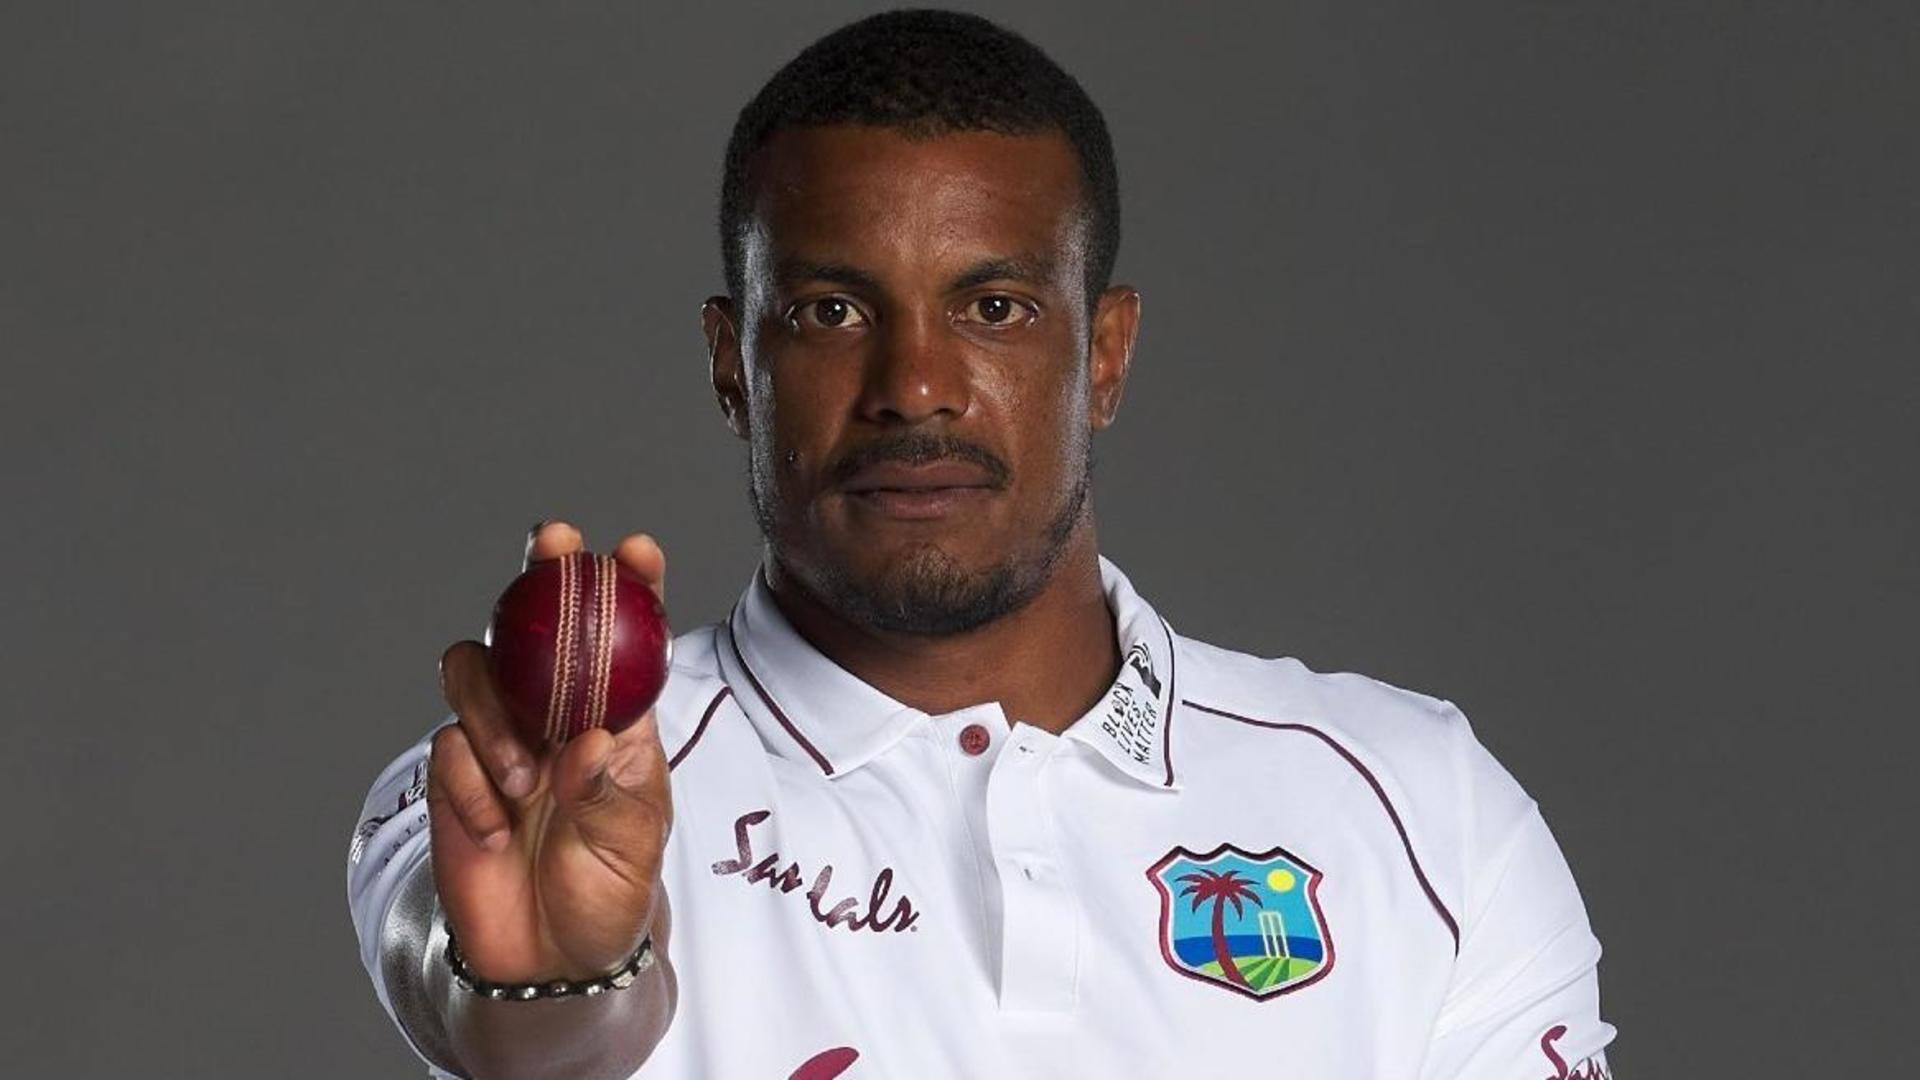 West Indies recall Shannon Gabriel for South Africa ODI series